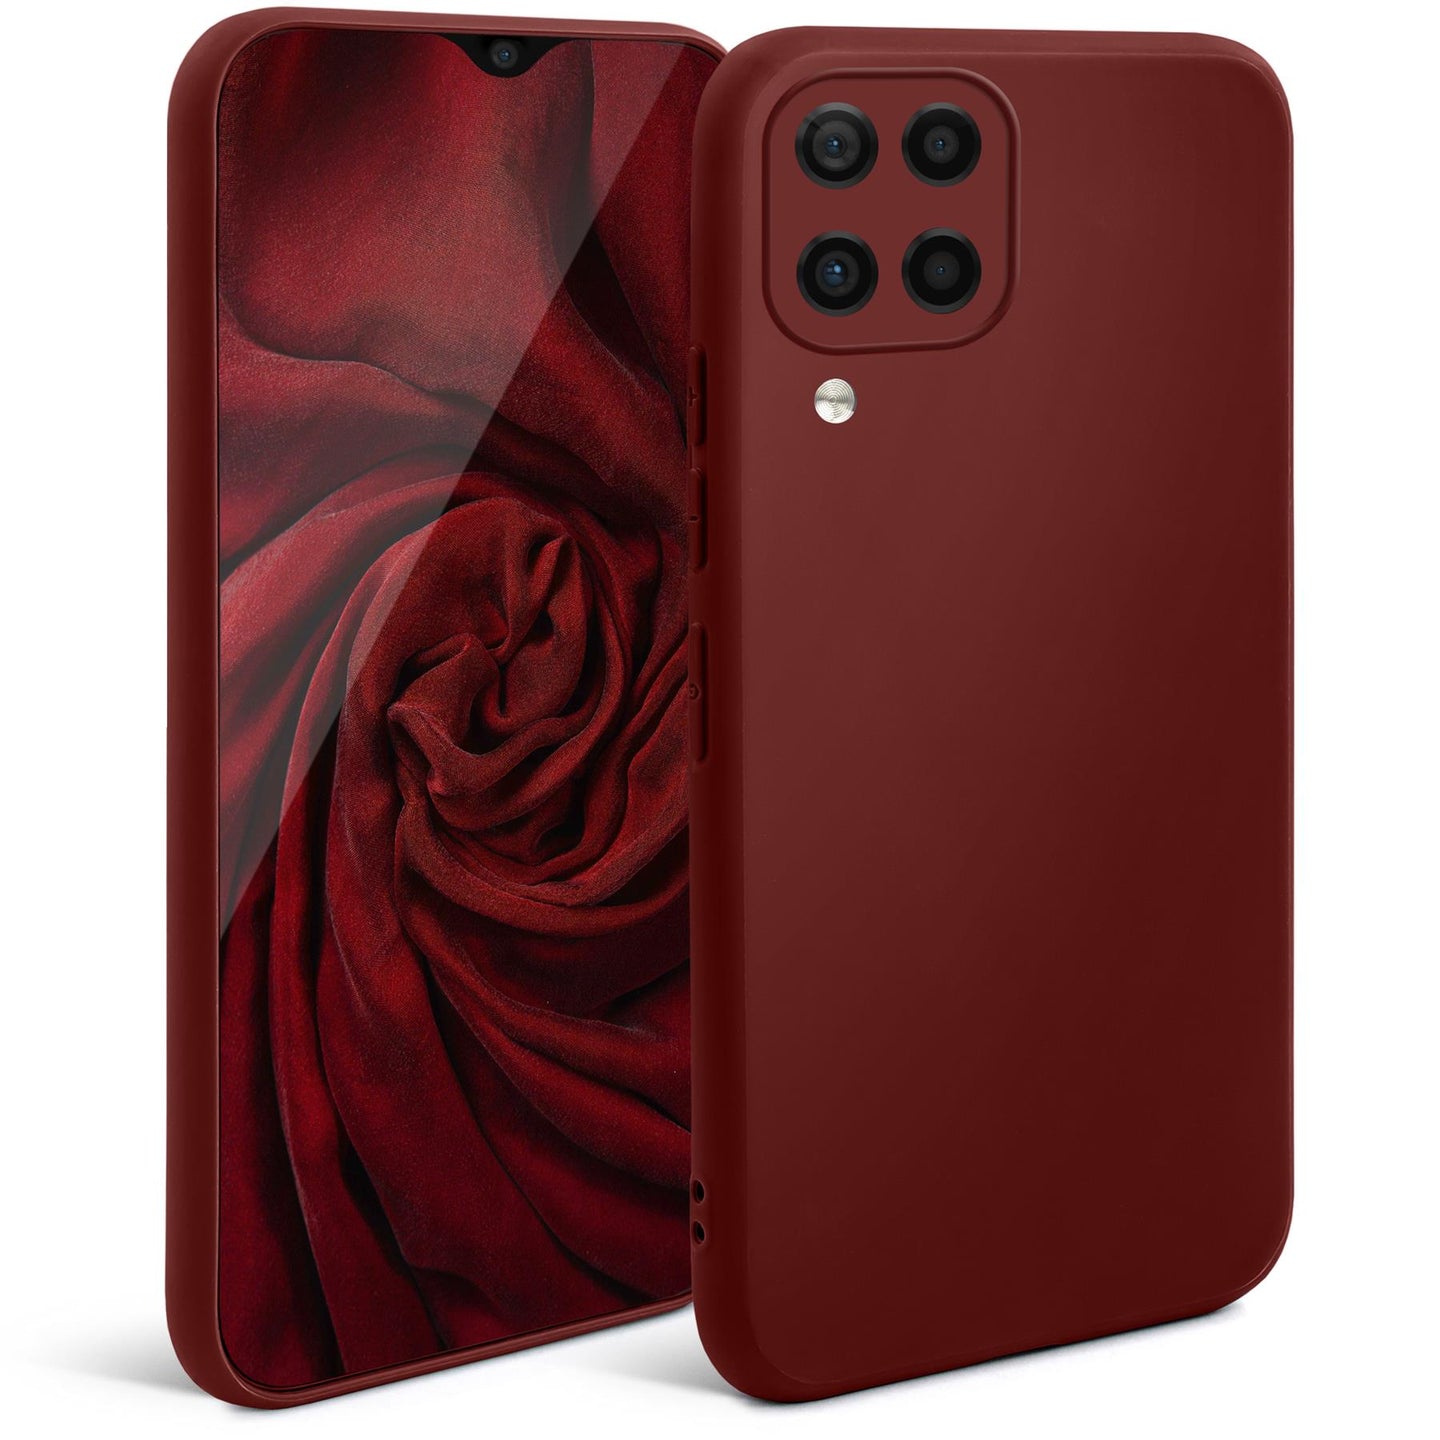 Moozy Minimalist Series Silicone Case for Samsung A12, Wine Red - Matte Finish Lightweight Mobile Phone Case Slim Soft Protective